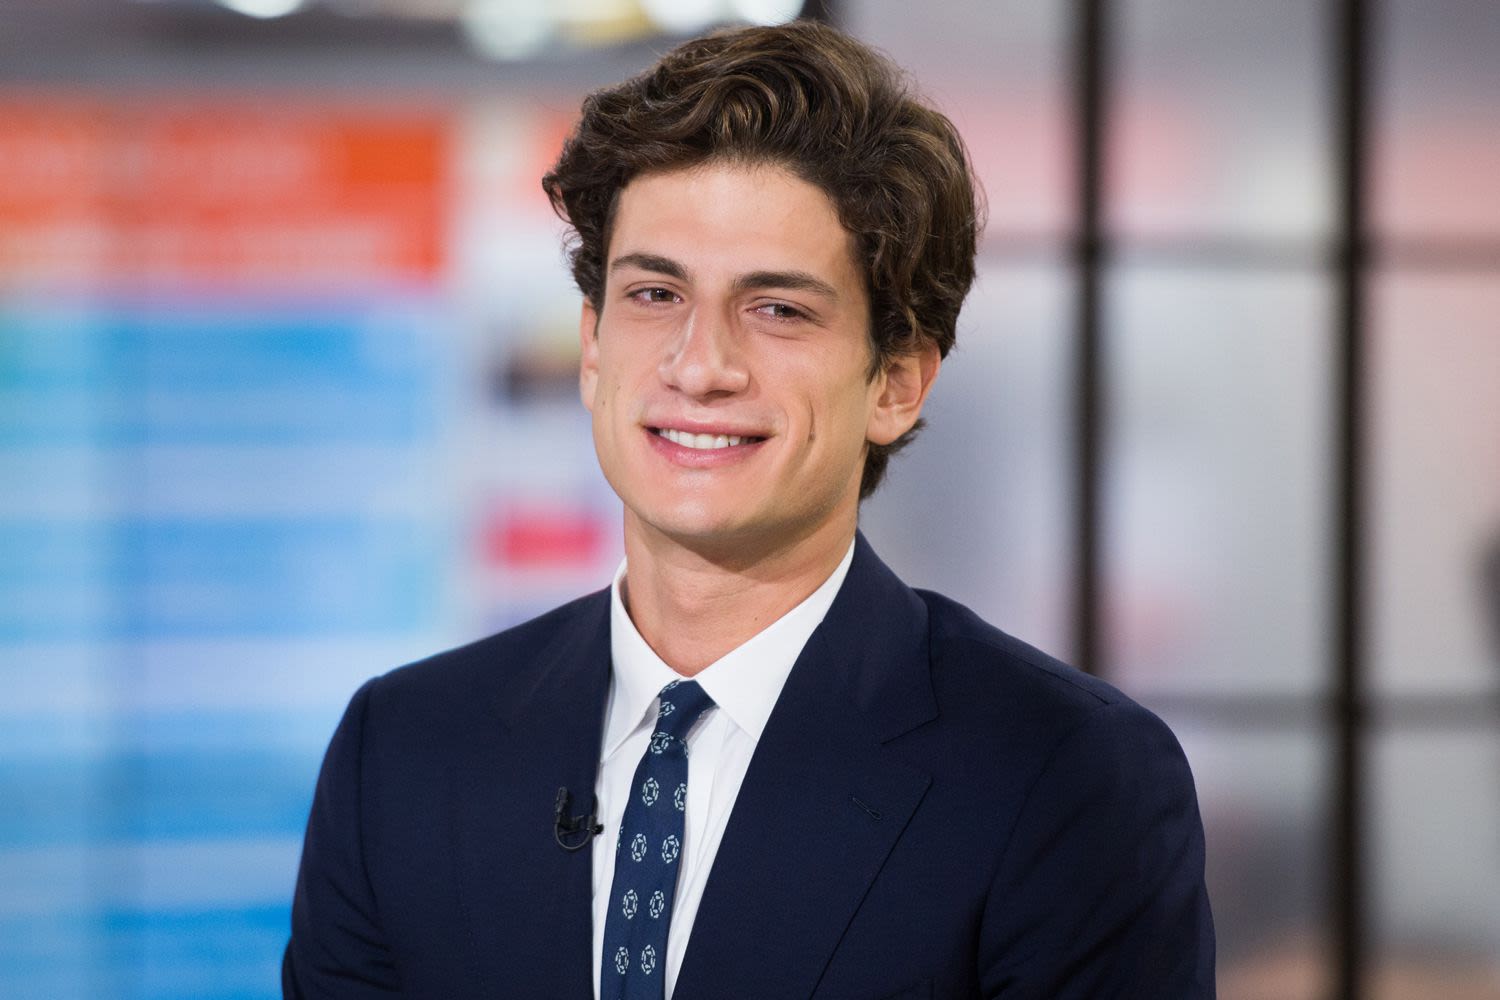 Jack Schlossberg Says He Won’t Go into Politics ‘Anytime Soon’ and Explains His Quirky Social Media Posts